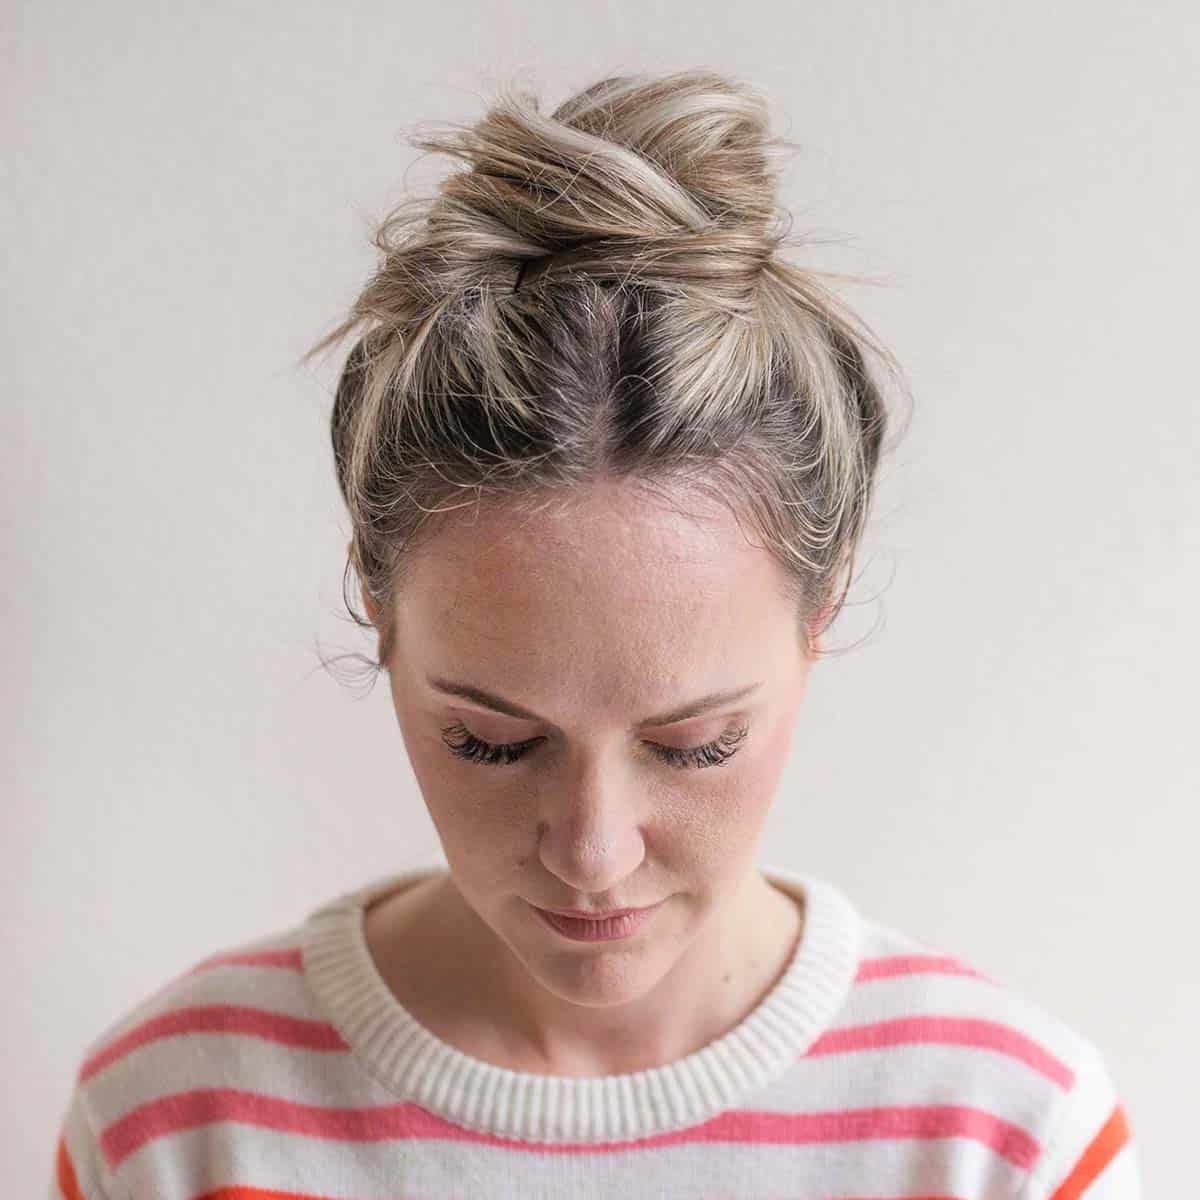 How To Style A Top Knot – A Beautiful Mess Intended For Recent Medium Length Hairstyles With Top Knot (View 8 of 25)